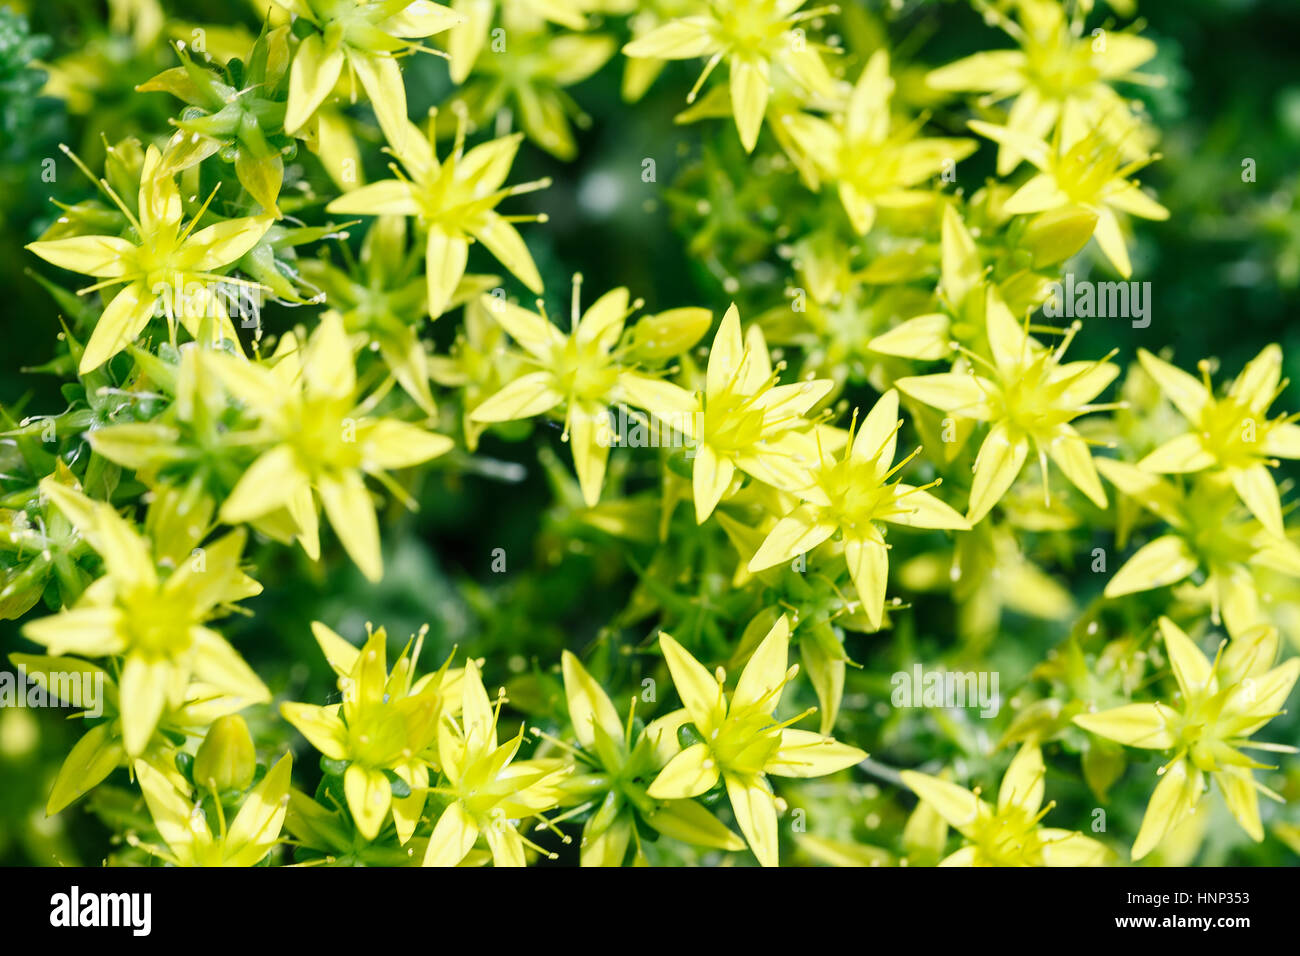 Spring background with beautiful yellow flowers Stock Photo